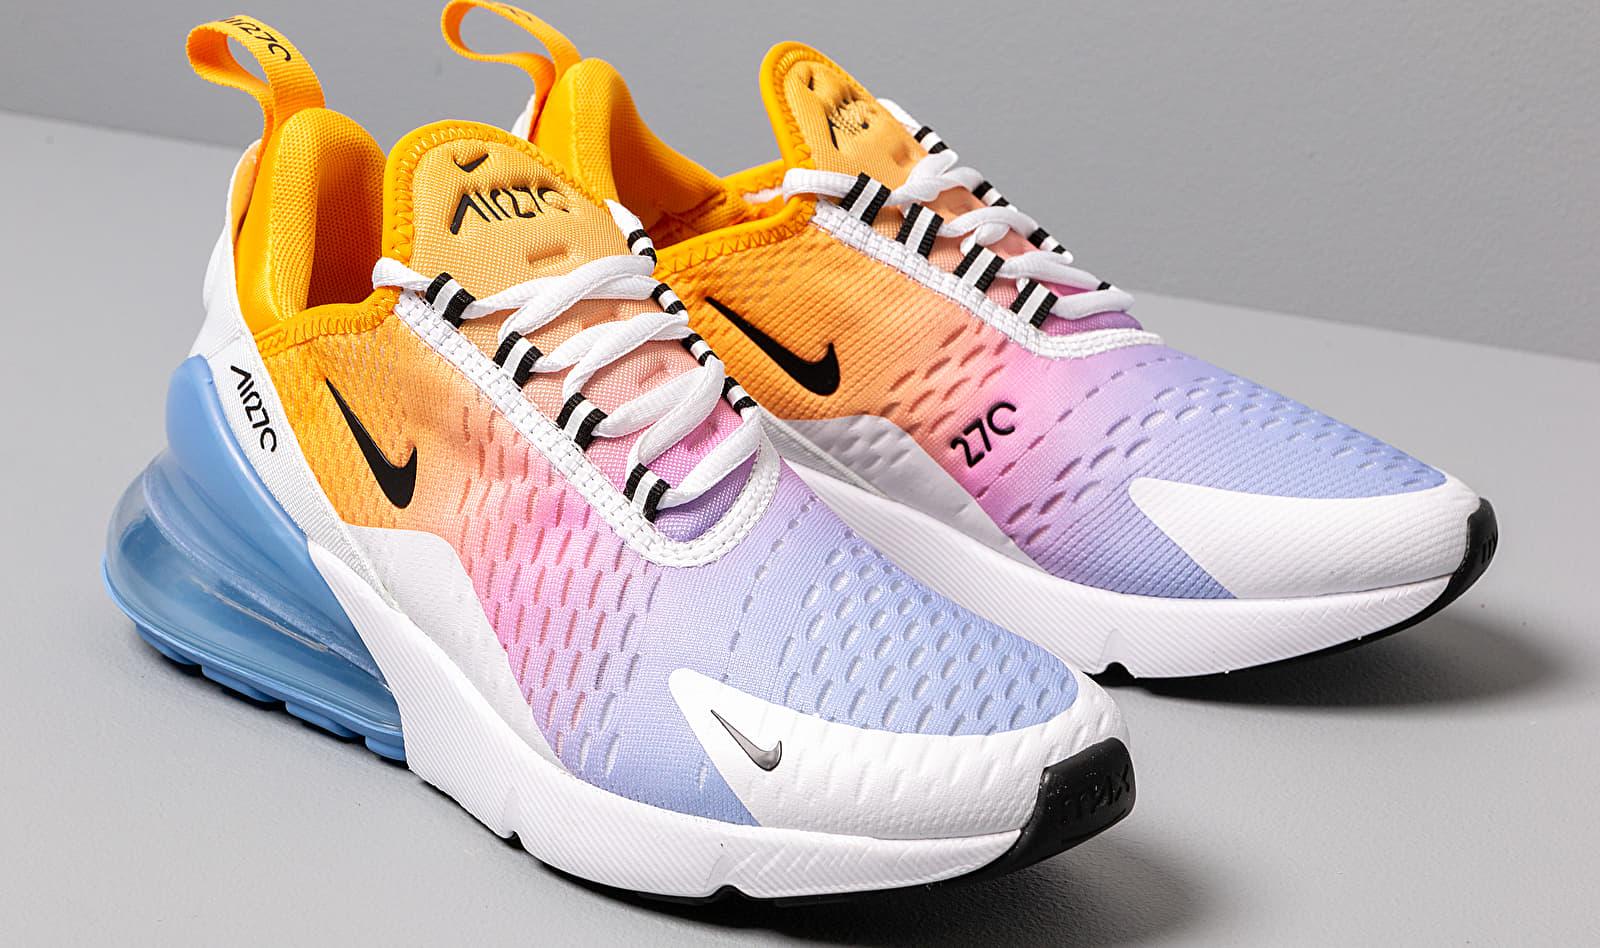 air max 270 trainers university gold black university blue psychic pink